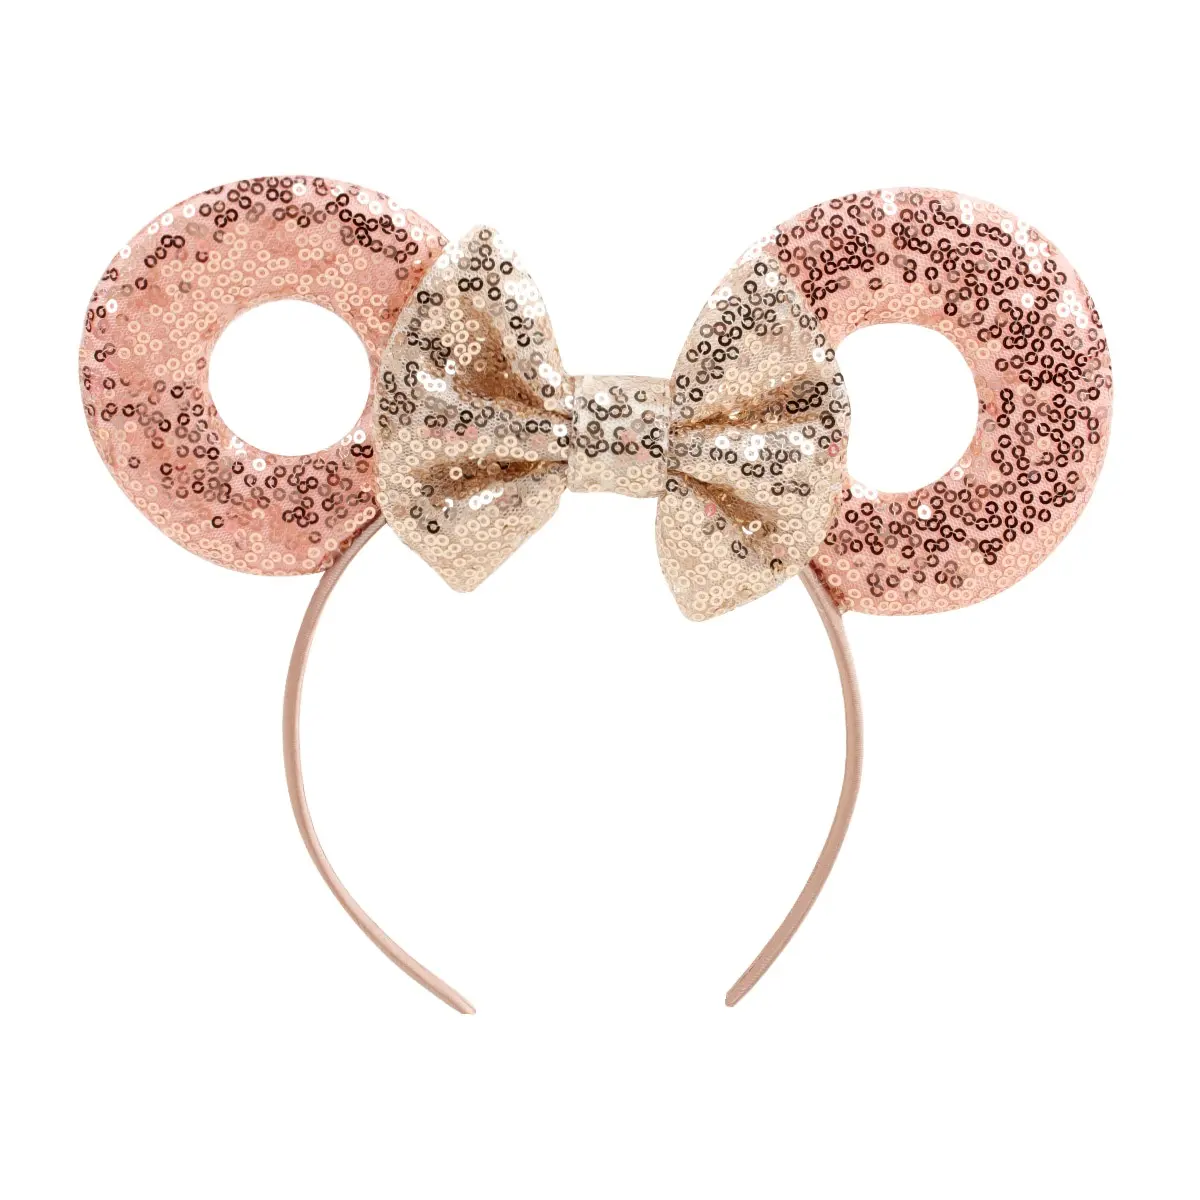 Aliexpress Hot Selling Hair Accessories for Kids Handmade Doughnut Headbands Knotted Headbands Mickey's Ear Bow Decoration